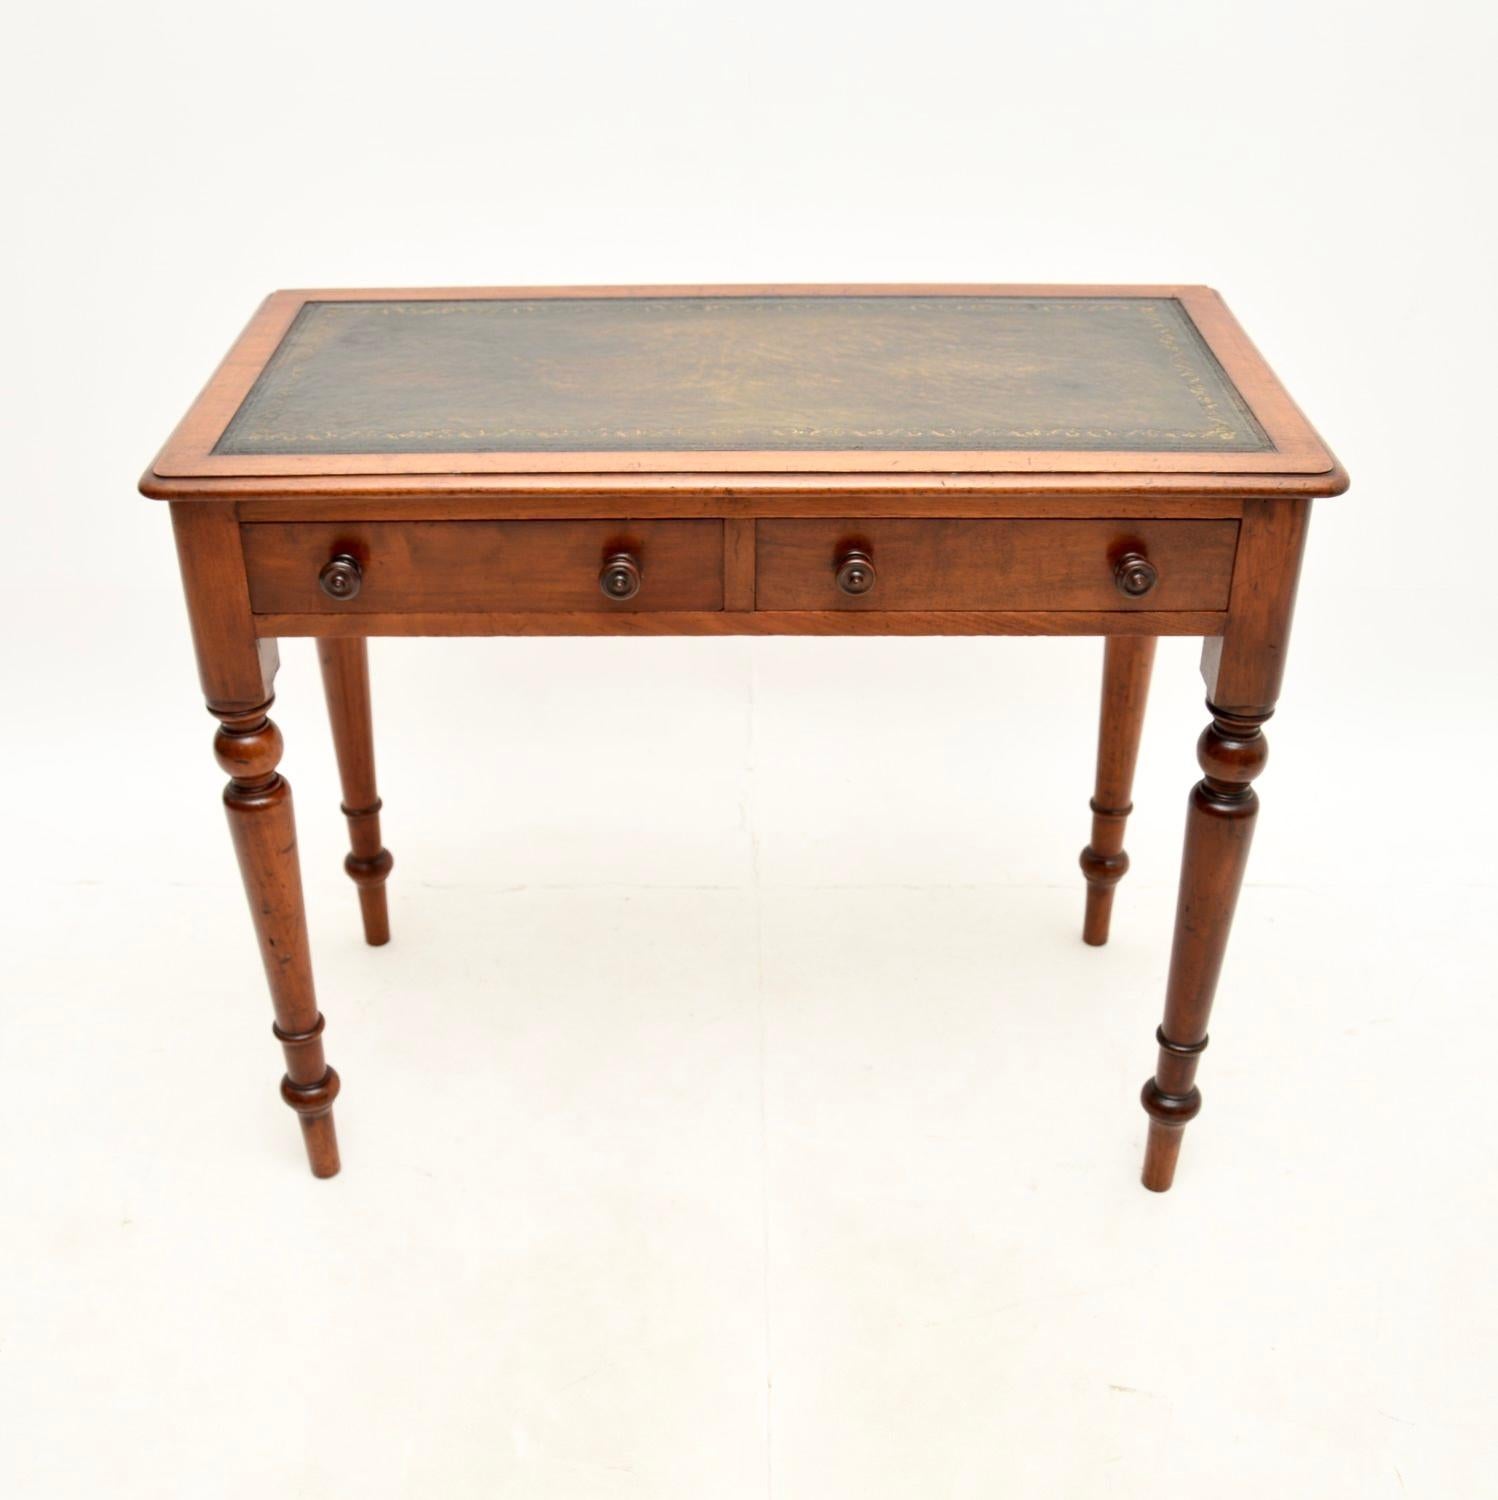 A smart and very useful antique Victorian writing table / desk. This was made in England, it dates from around the 1860-1880 period.

It is very well made and is a very useful size, not too deep from front to back. The inset leather writing surface